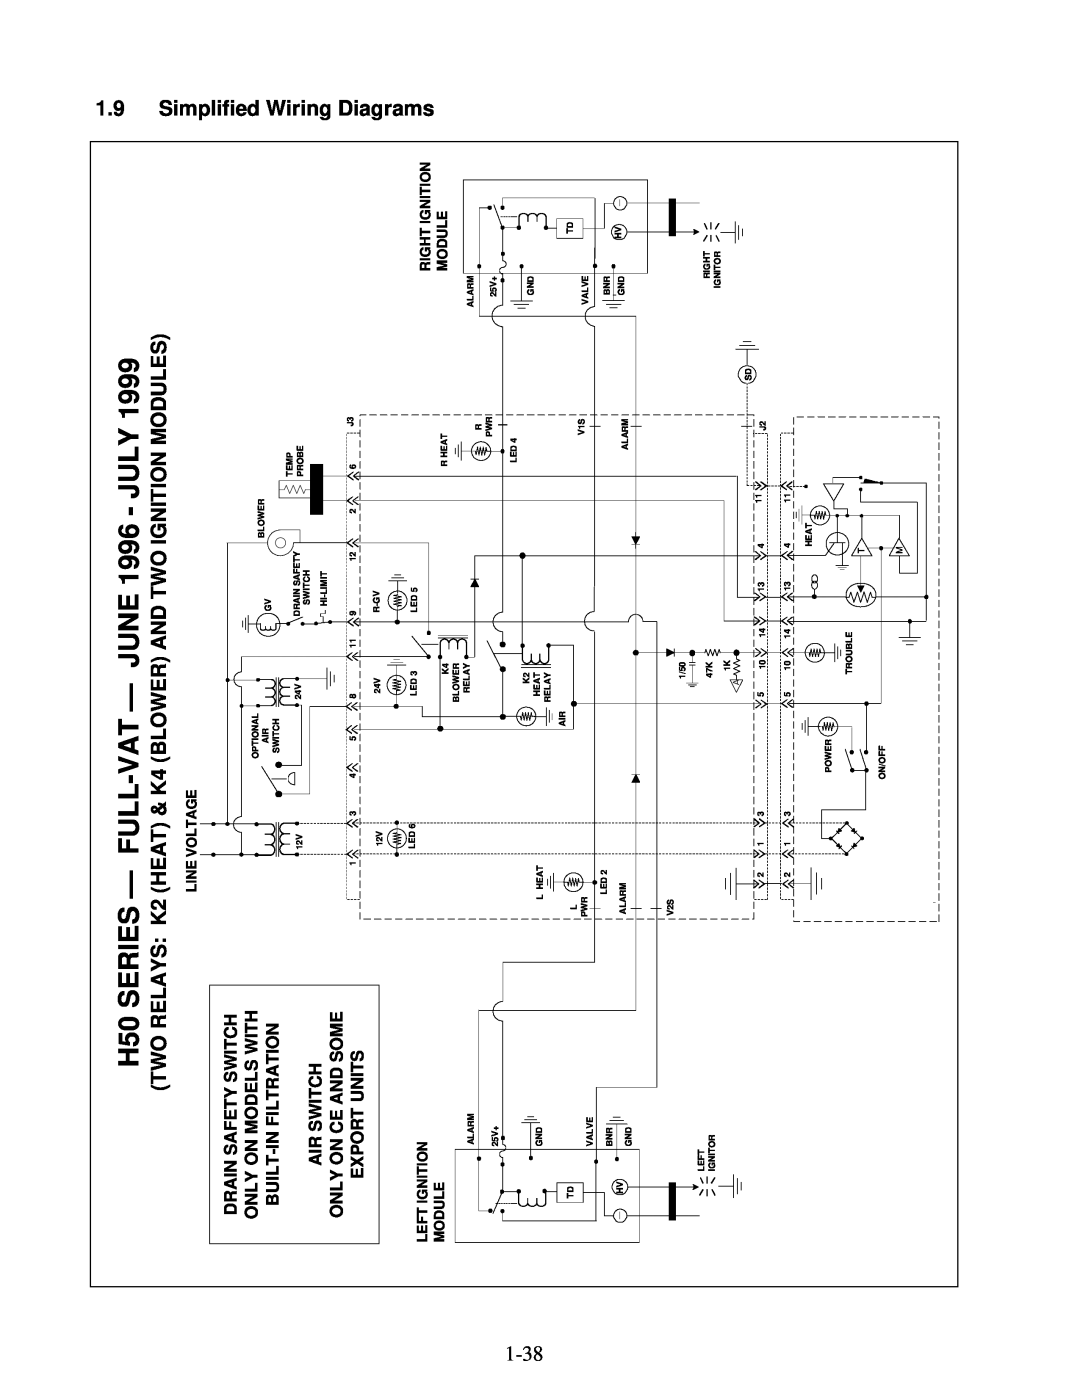 Frymaster H50 Series H50 SERIES — FULL-VAT— JUNE 1996 - JULY, Simplified Wiring Diagrams, Line Voltage, Left Ignition 